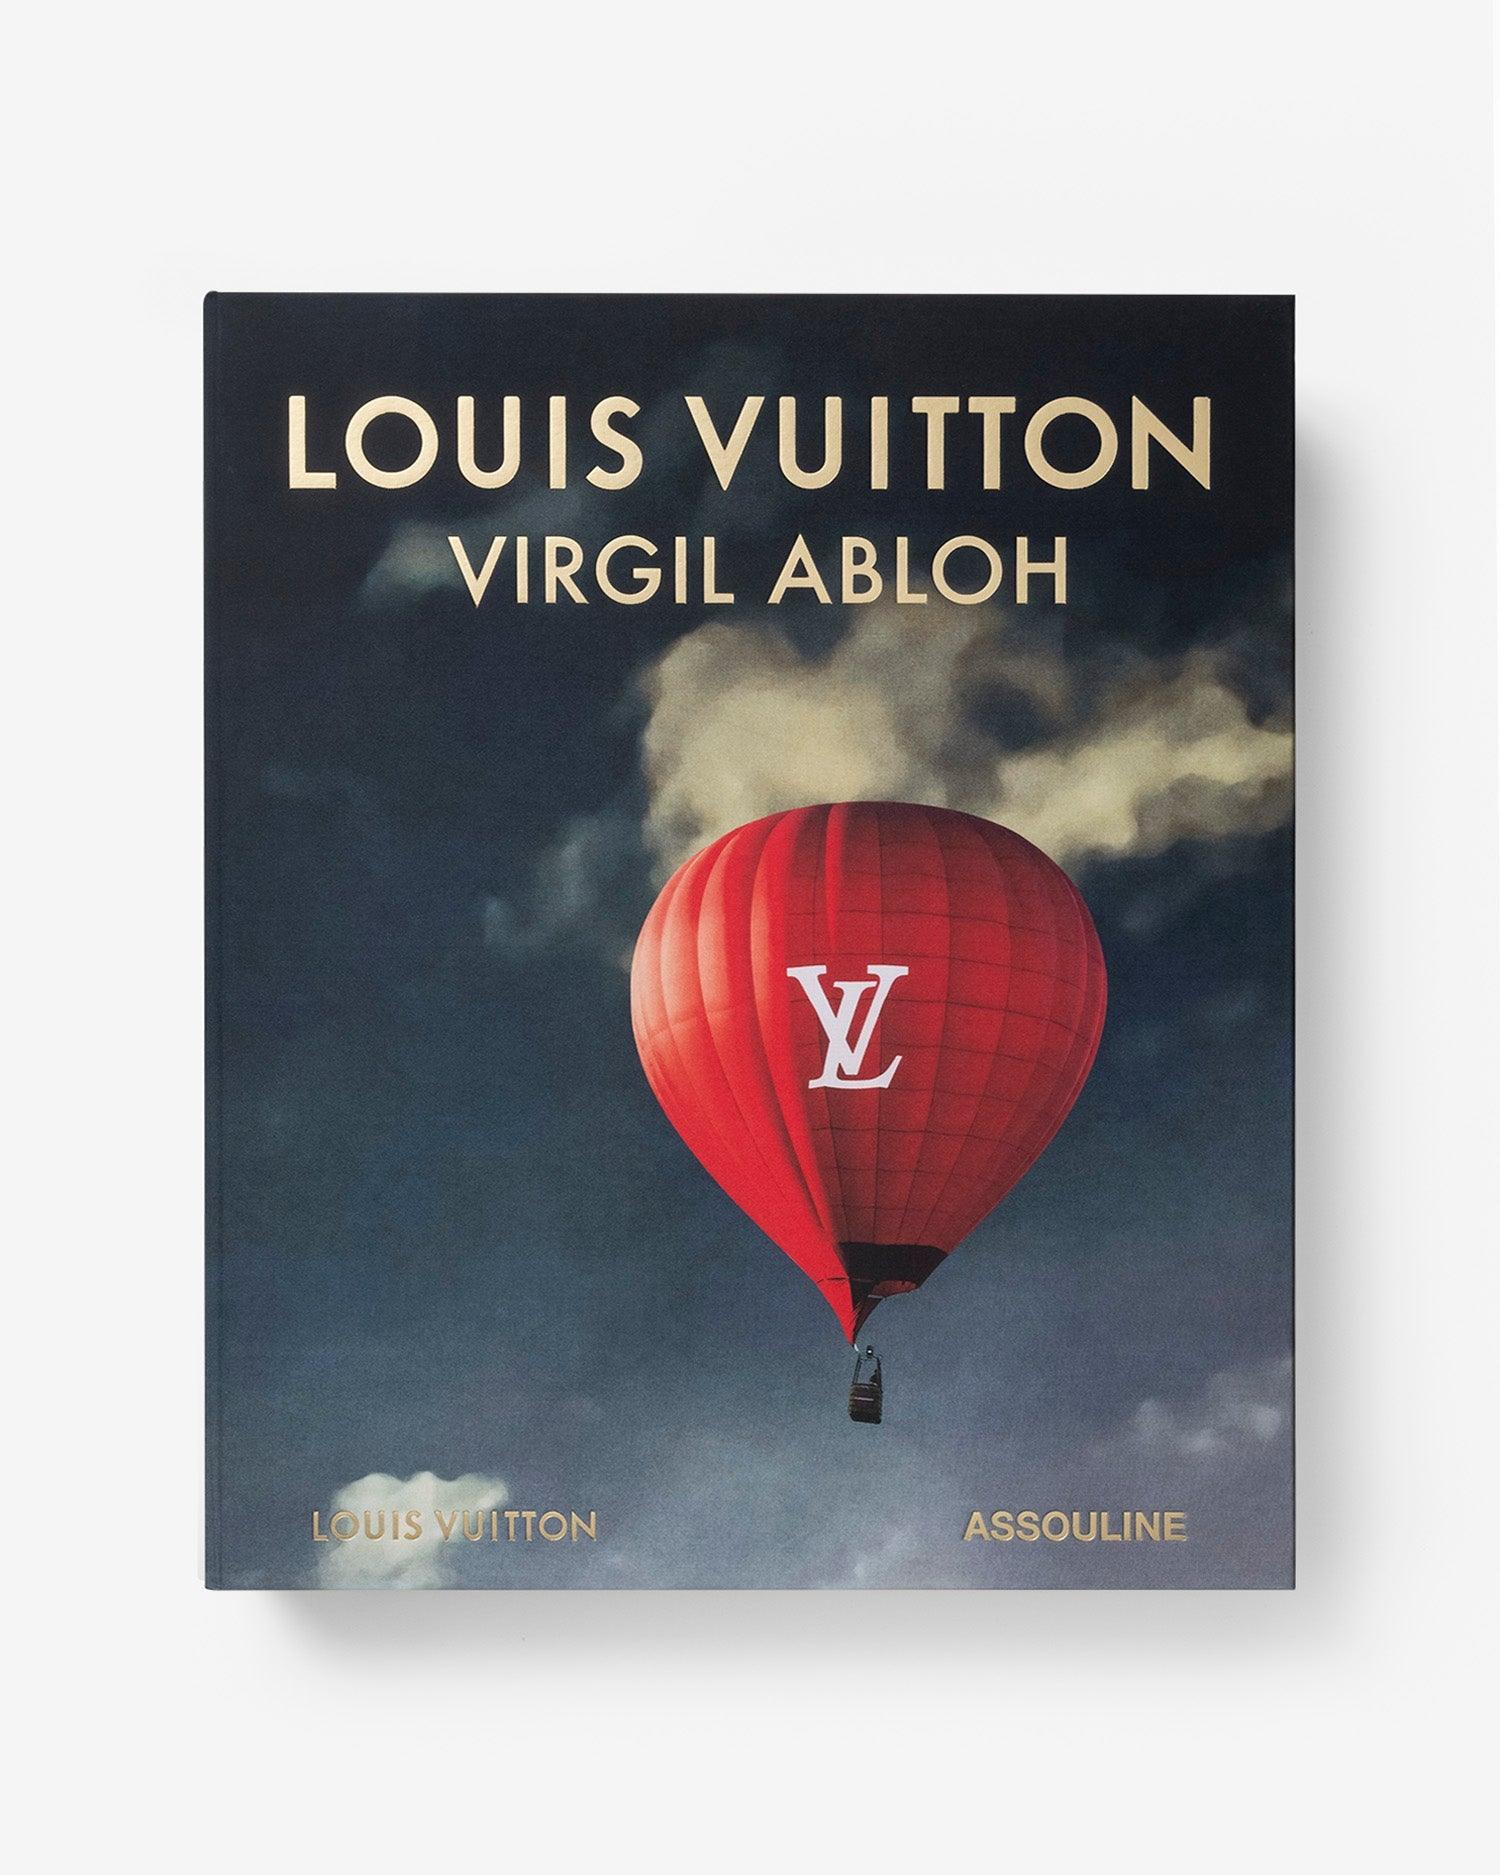 Louis Vuitton: Virgil Abloh (Balloon) by Anders Christian Madsen 